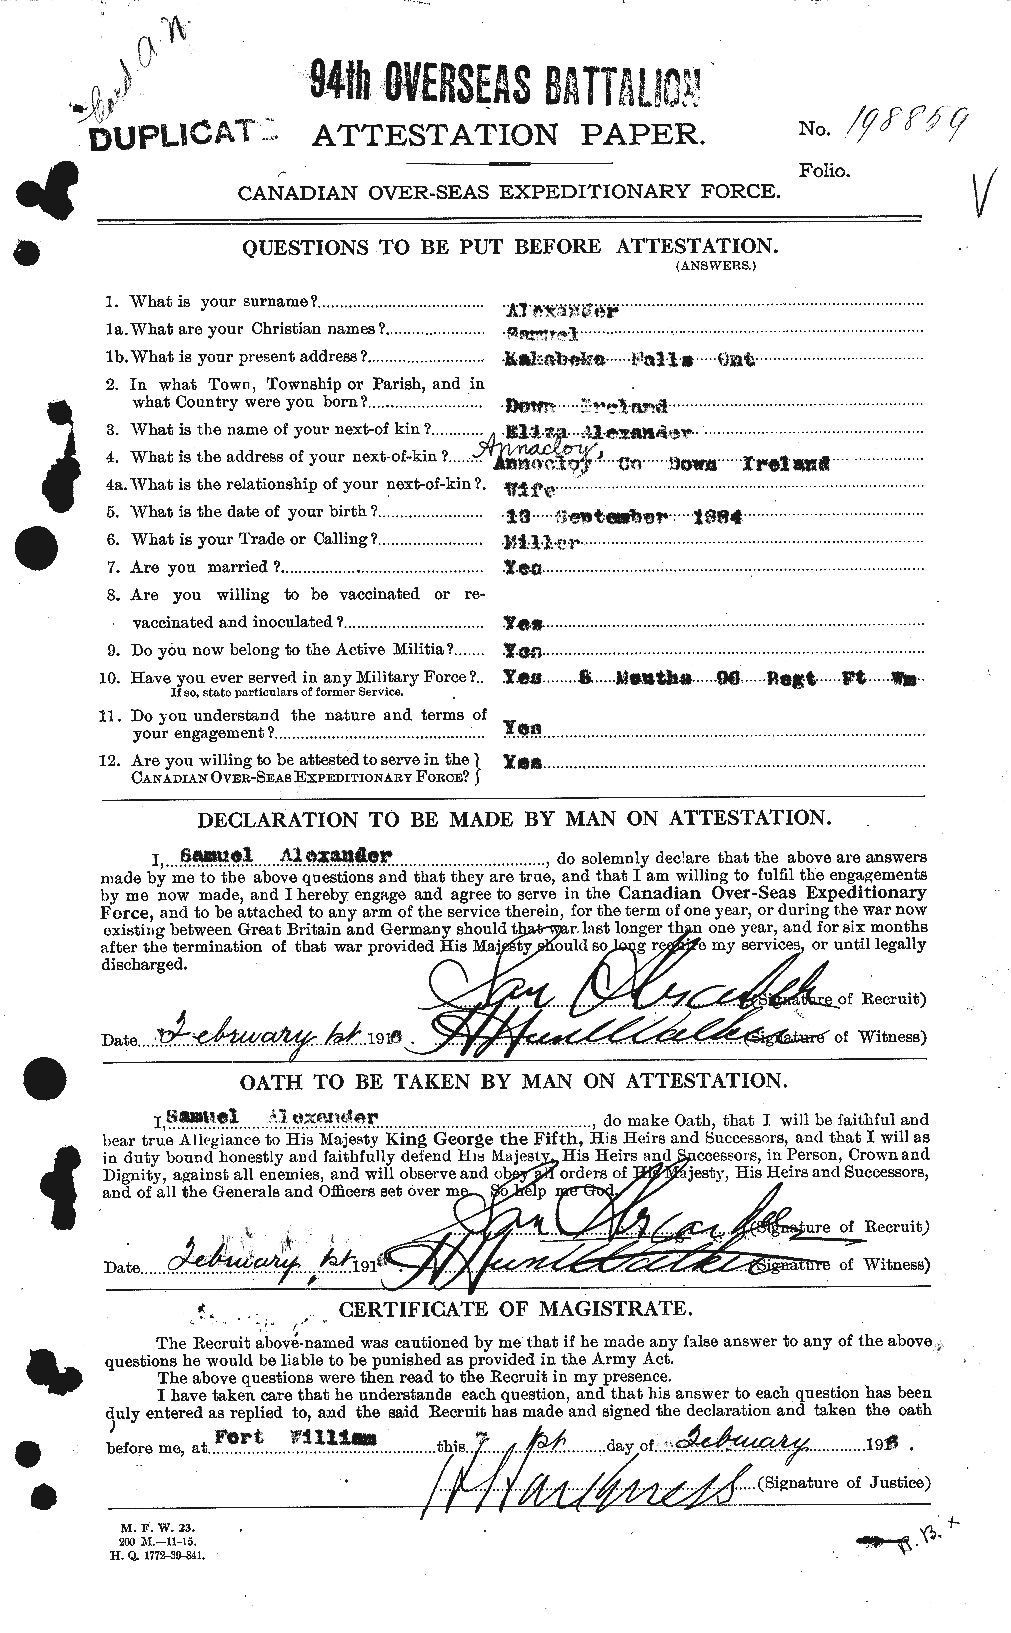 Personnel Records of the First World War - CEF 204354a